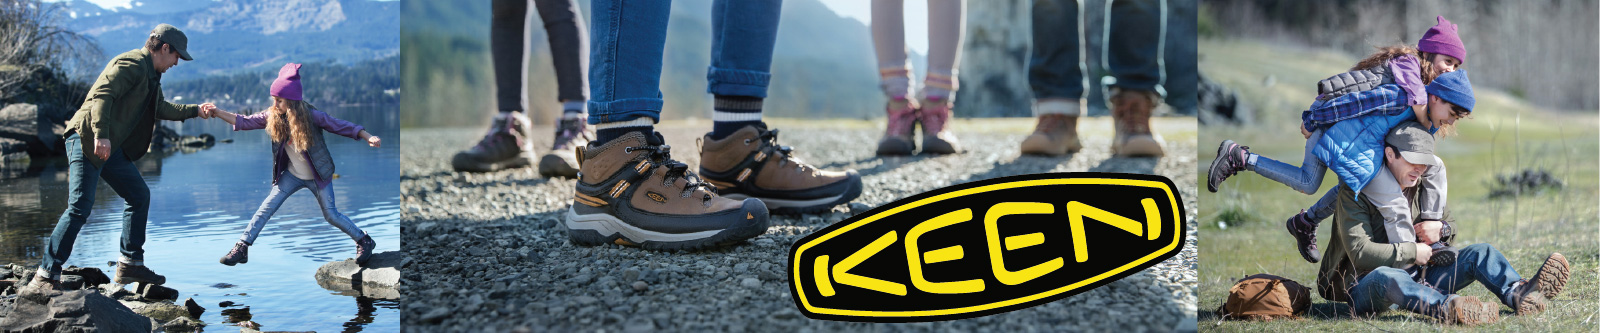 keen shoes sale south africa